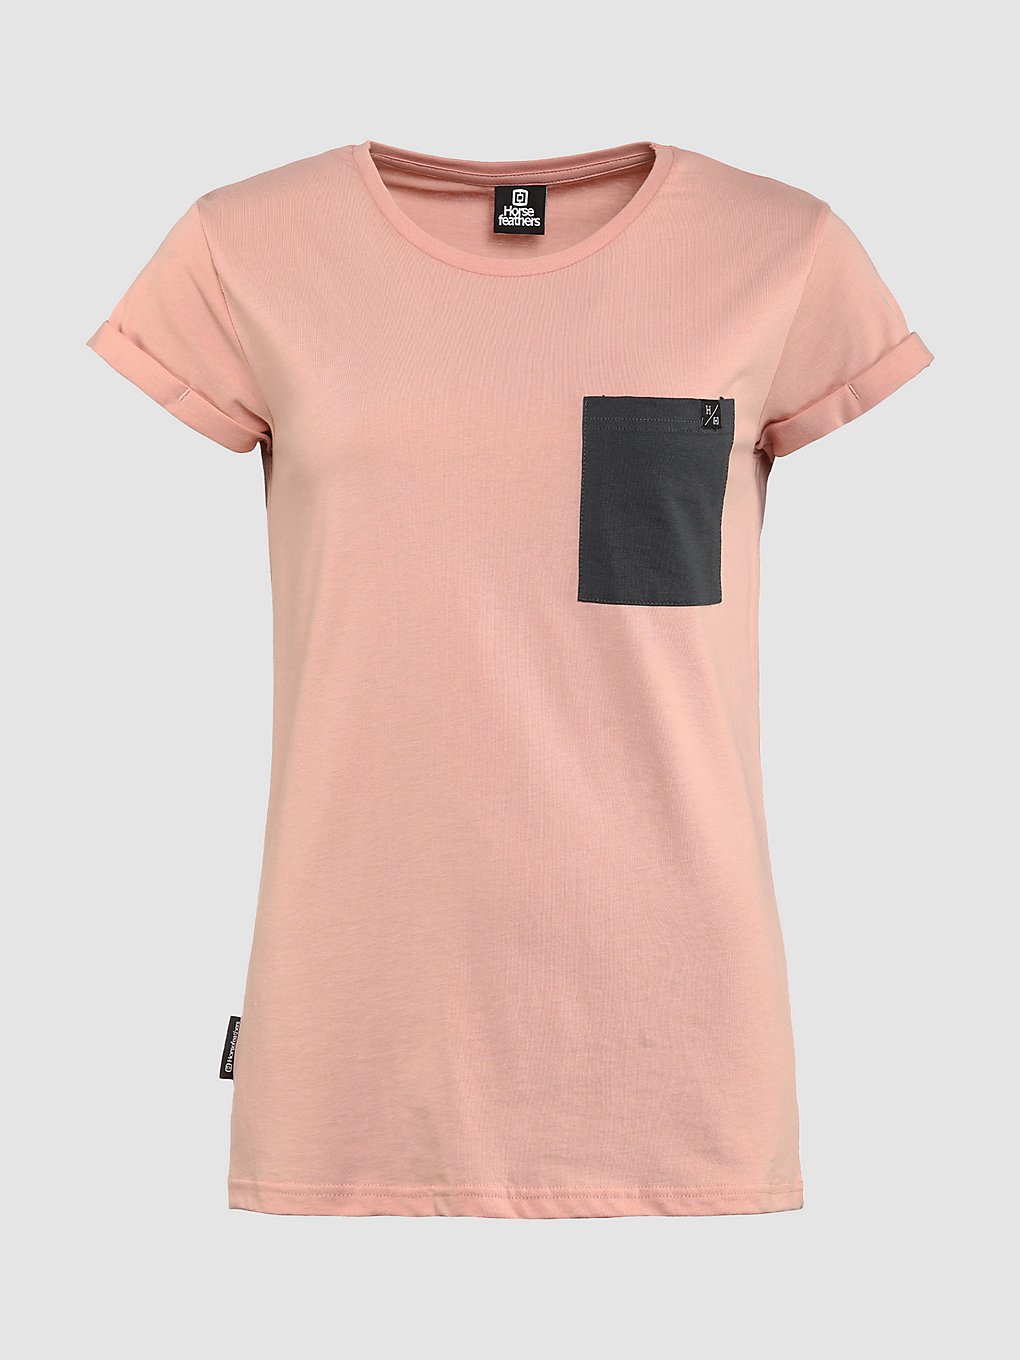 Horsefeathers Connie T-Shirt dusty pink kaufen